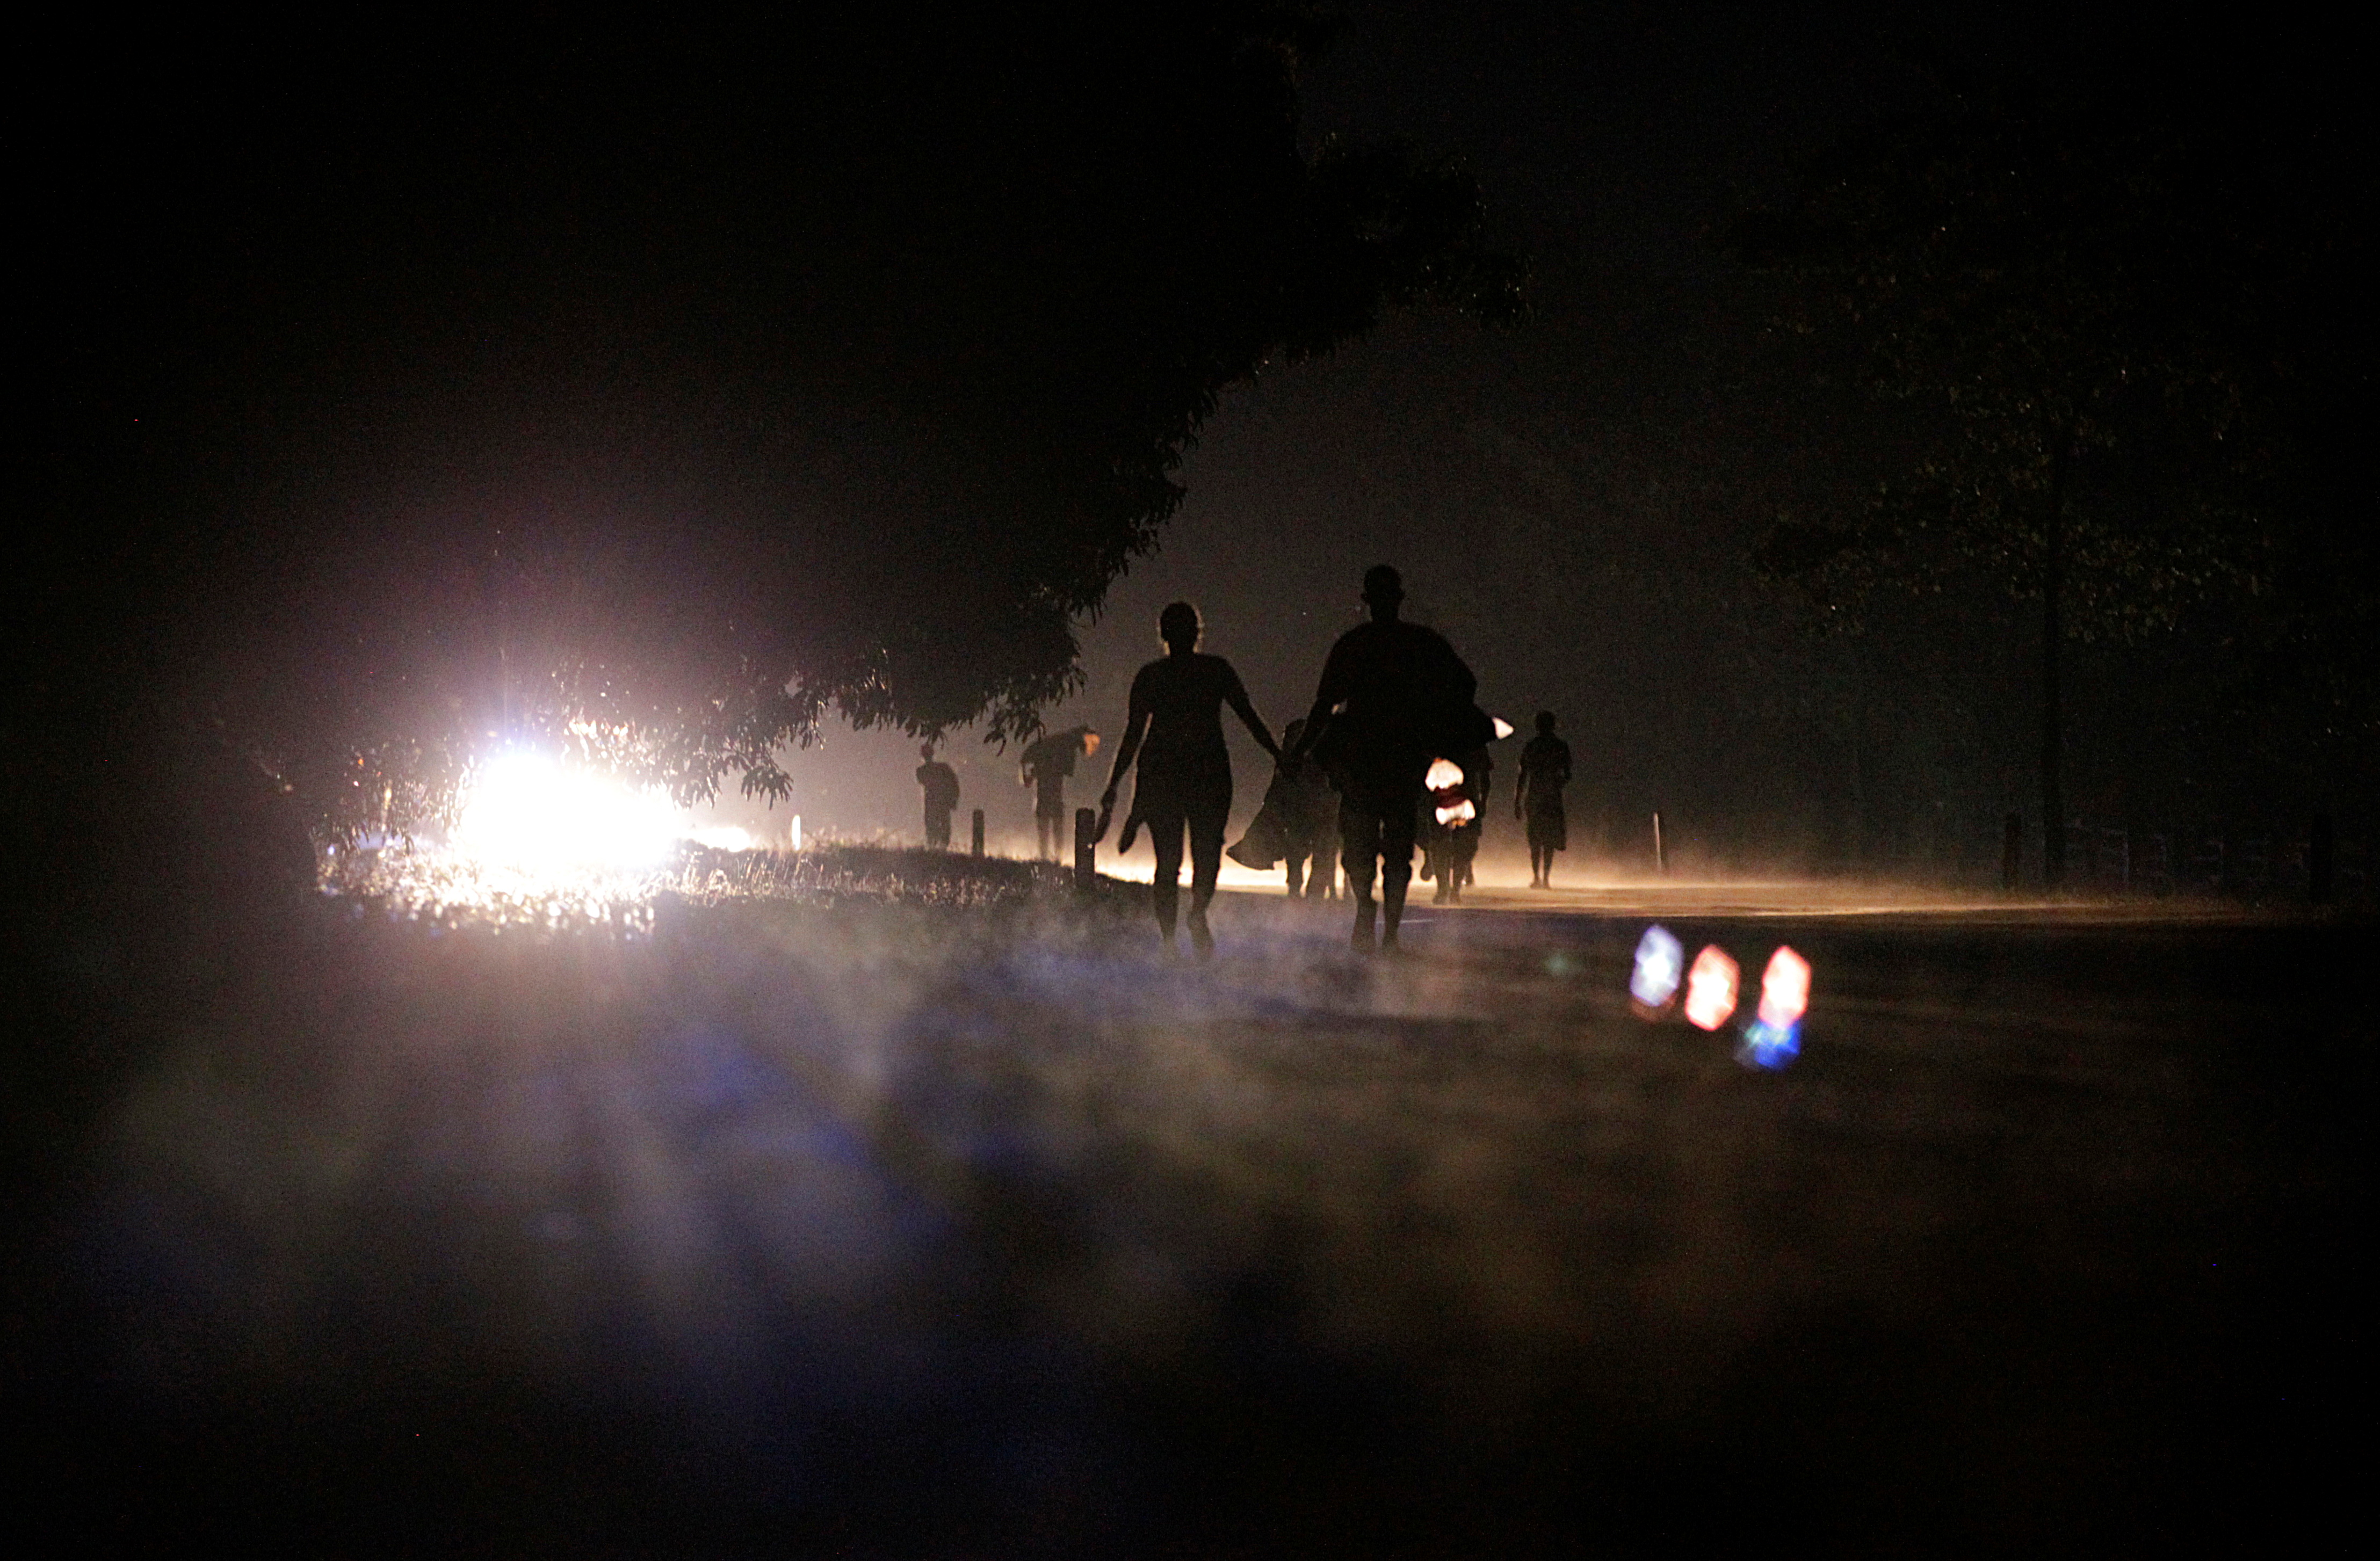 Migrants walk on a road at night as they take part in a caravan heading to Mexico City, in El Fortin, Mexico October 29, 2021. REUTERS/Daniel Becerril